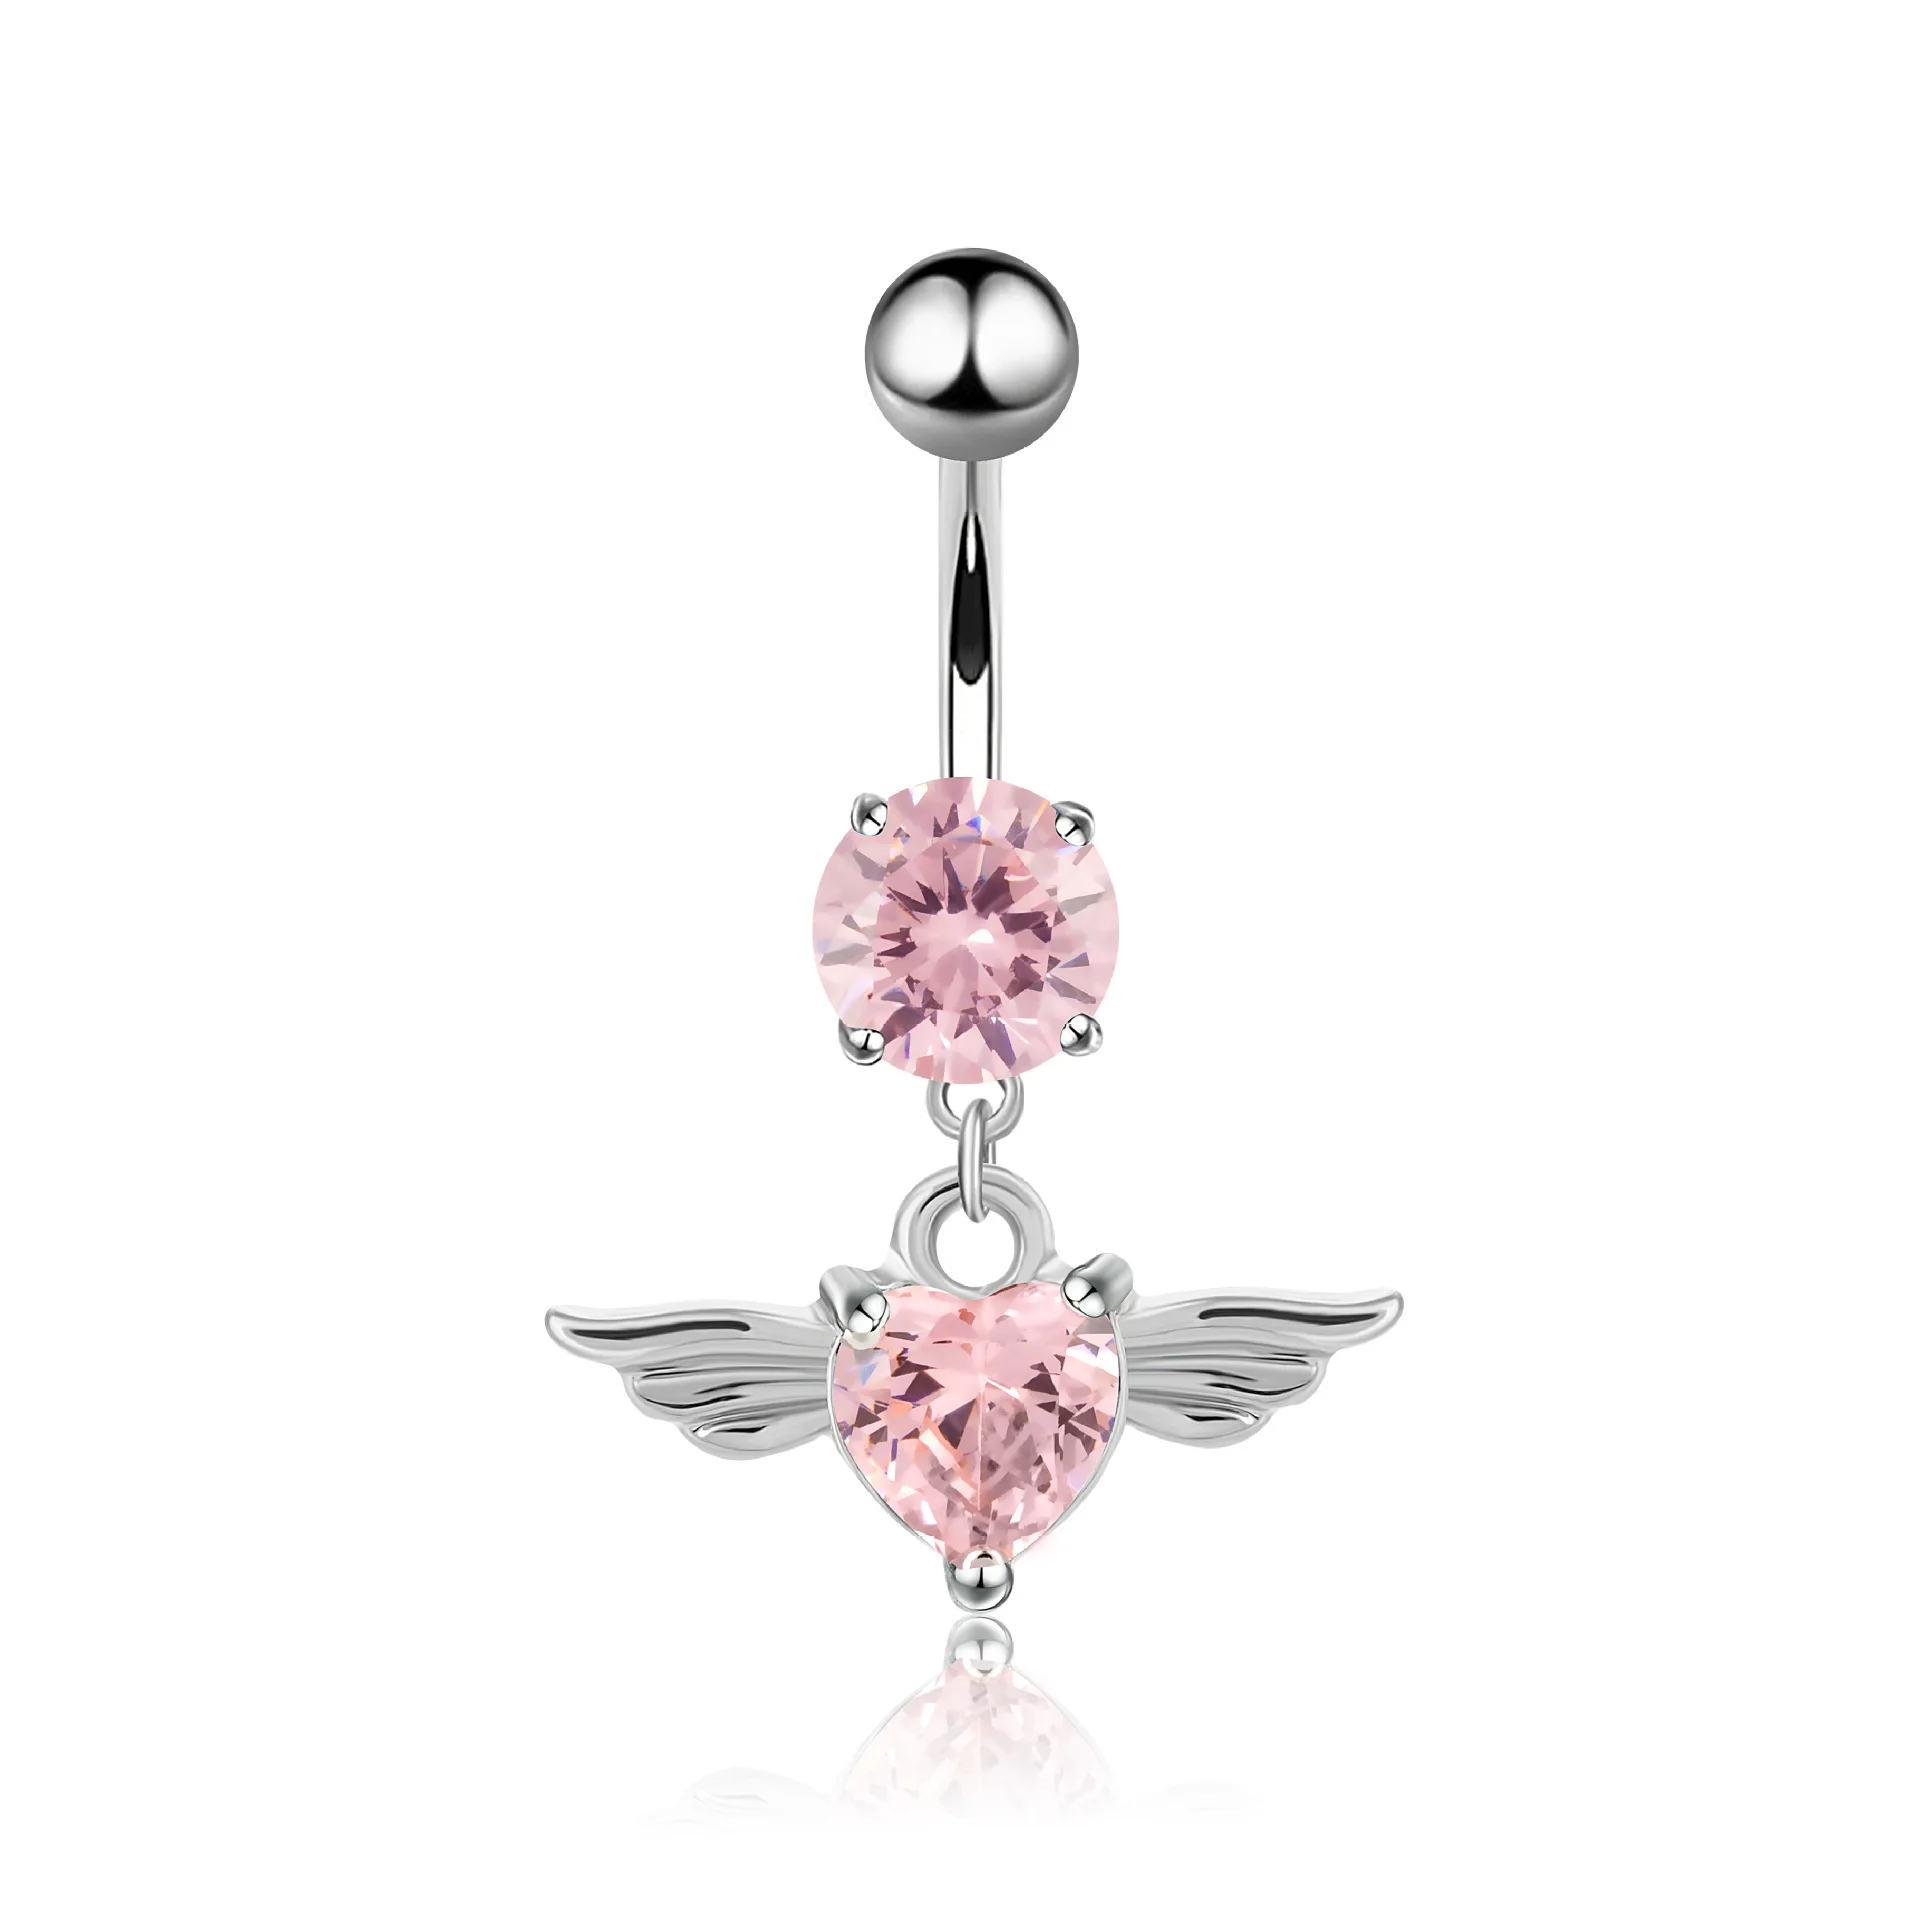 Sold by Piece Freedom Fashion 316L Surgical Steel Gemmed Navel Ring with Angel Wings Dangle 